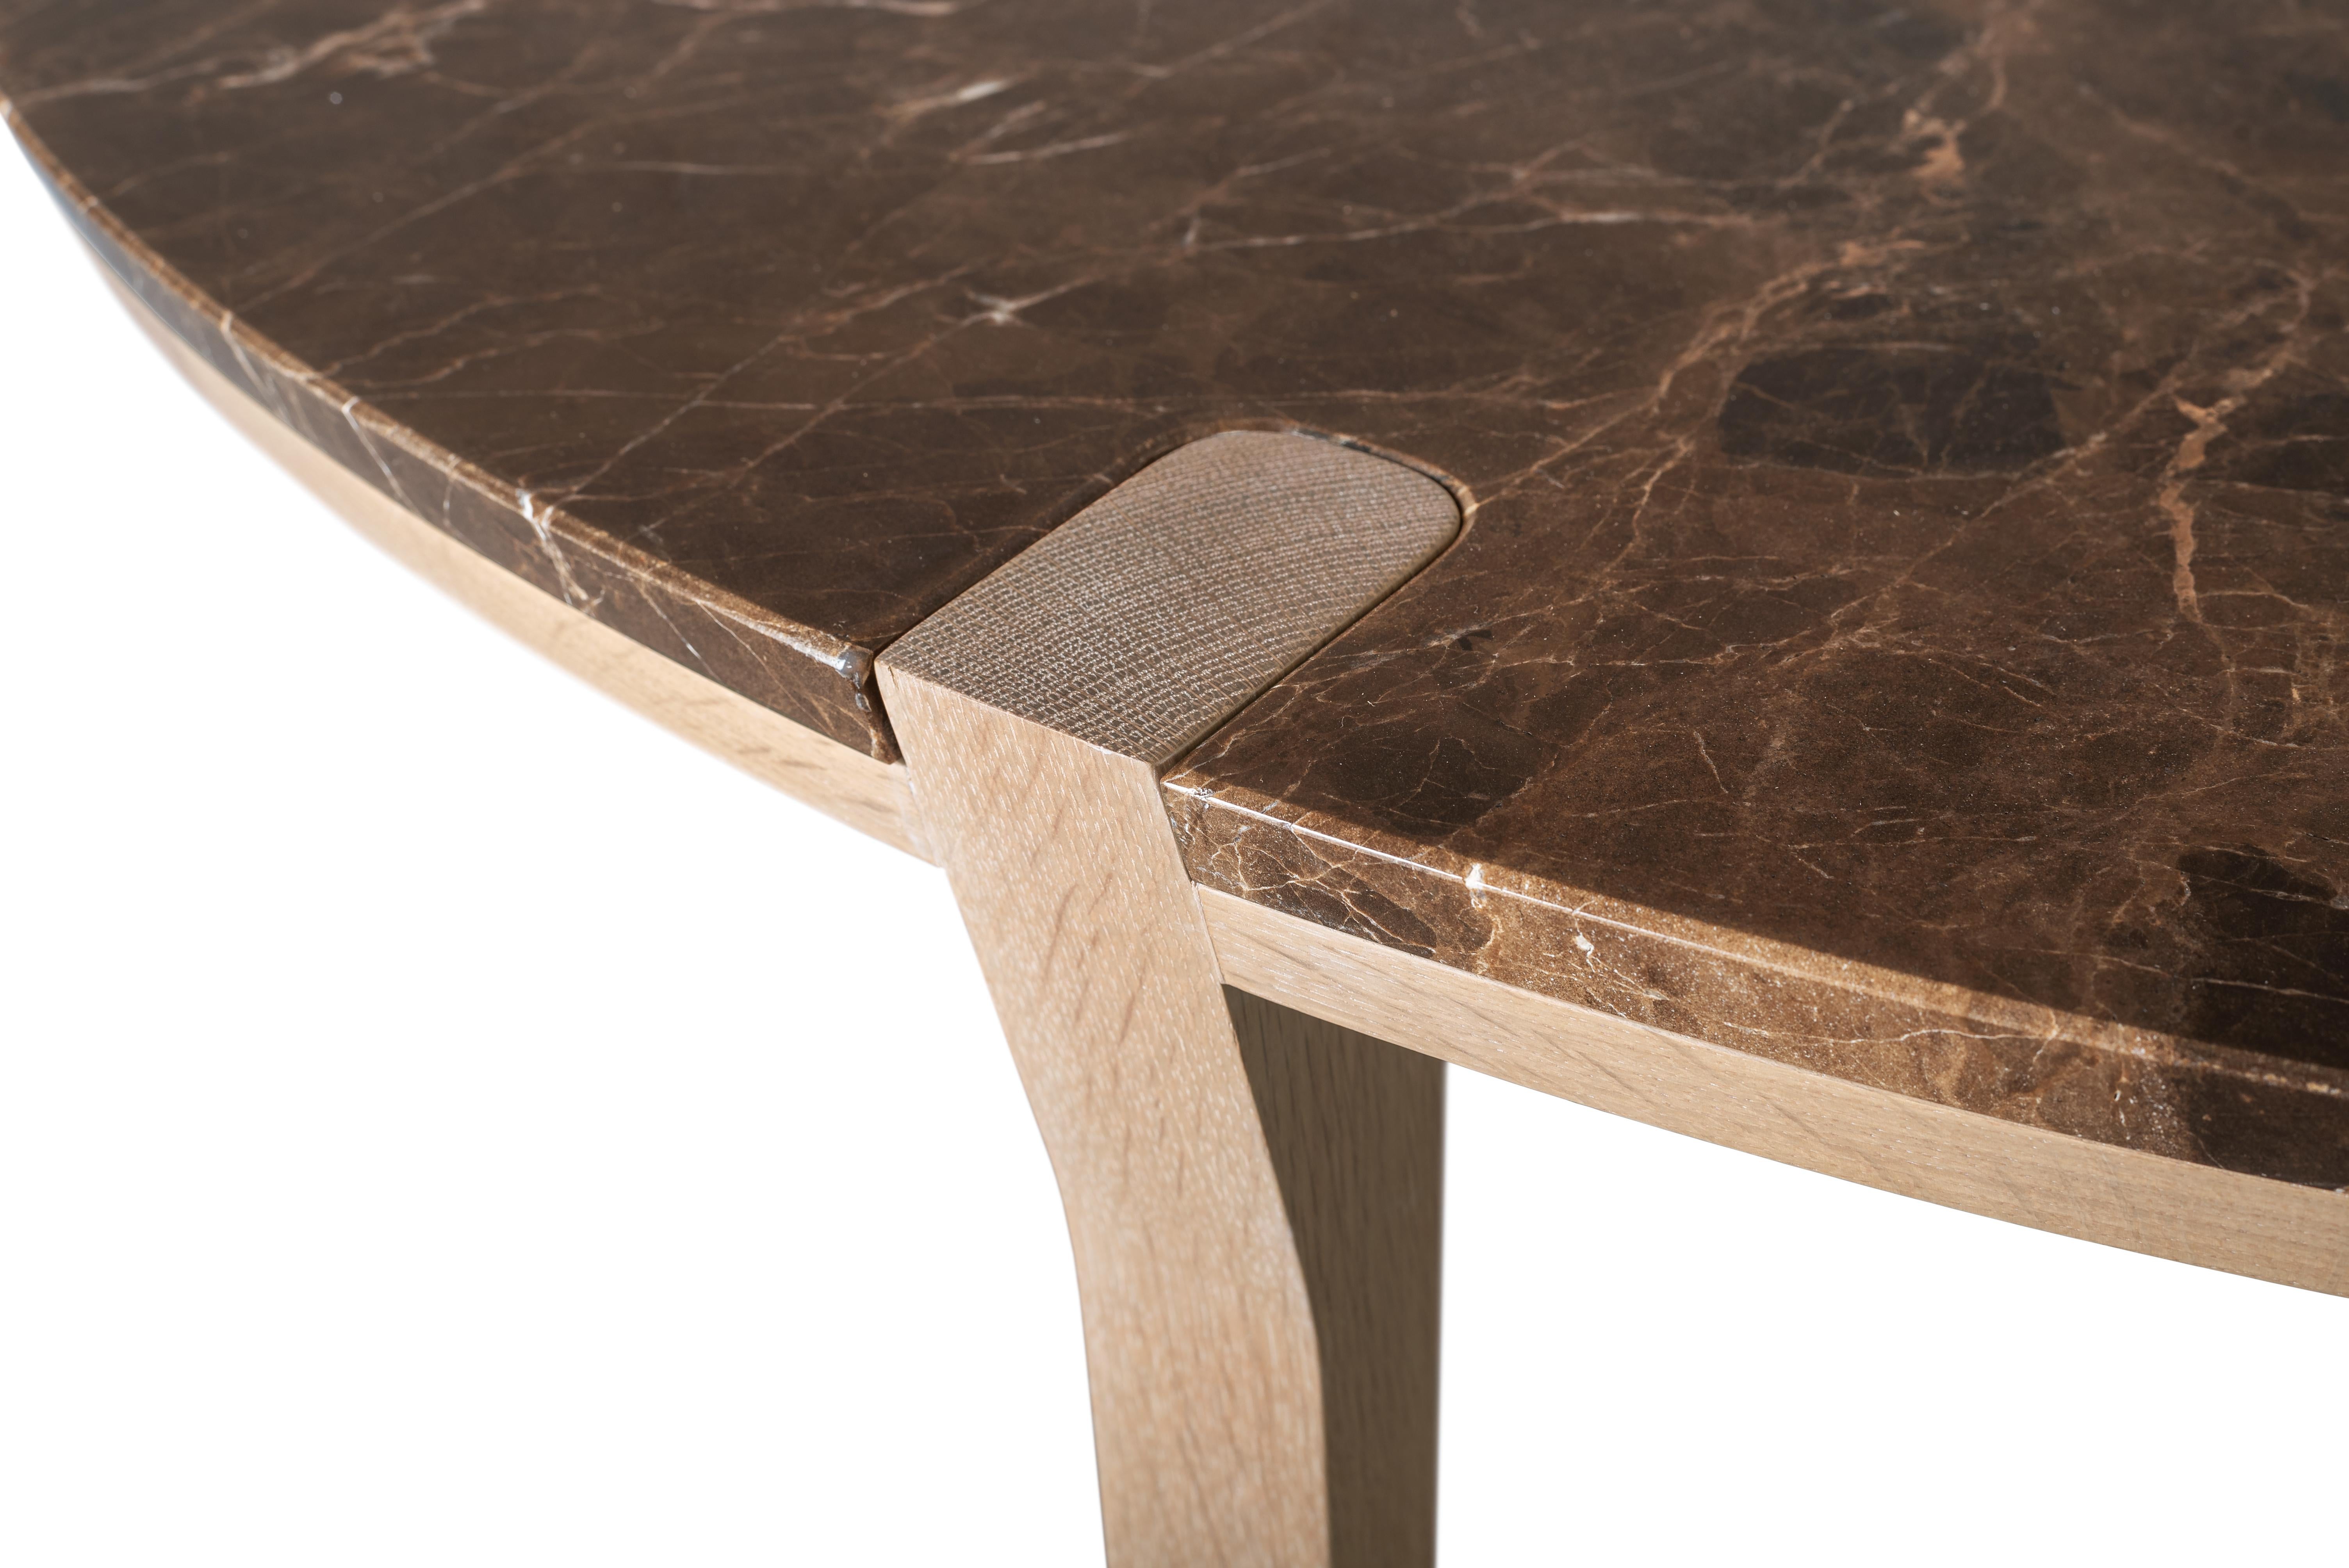 Beautifull center corner table, was designed to disrupt the Classic position of the legs of most of the tables, putting it on a particular position that assures the stability and leaves the corners free.
Marble top and a choice between oak or